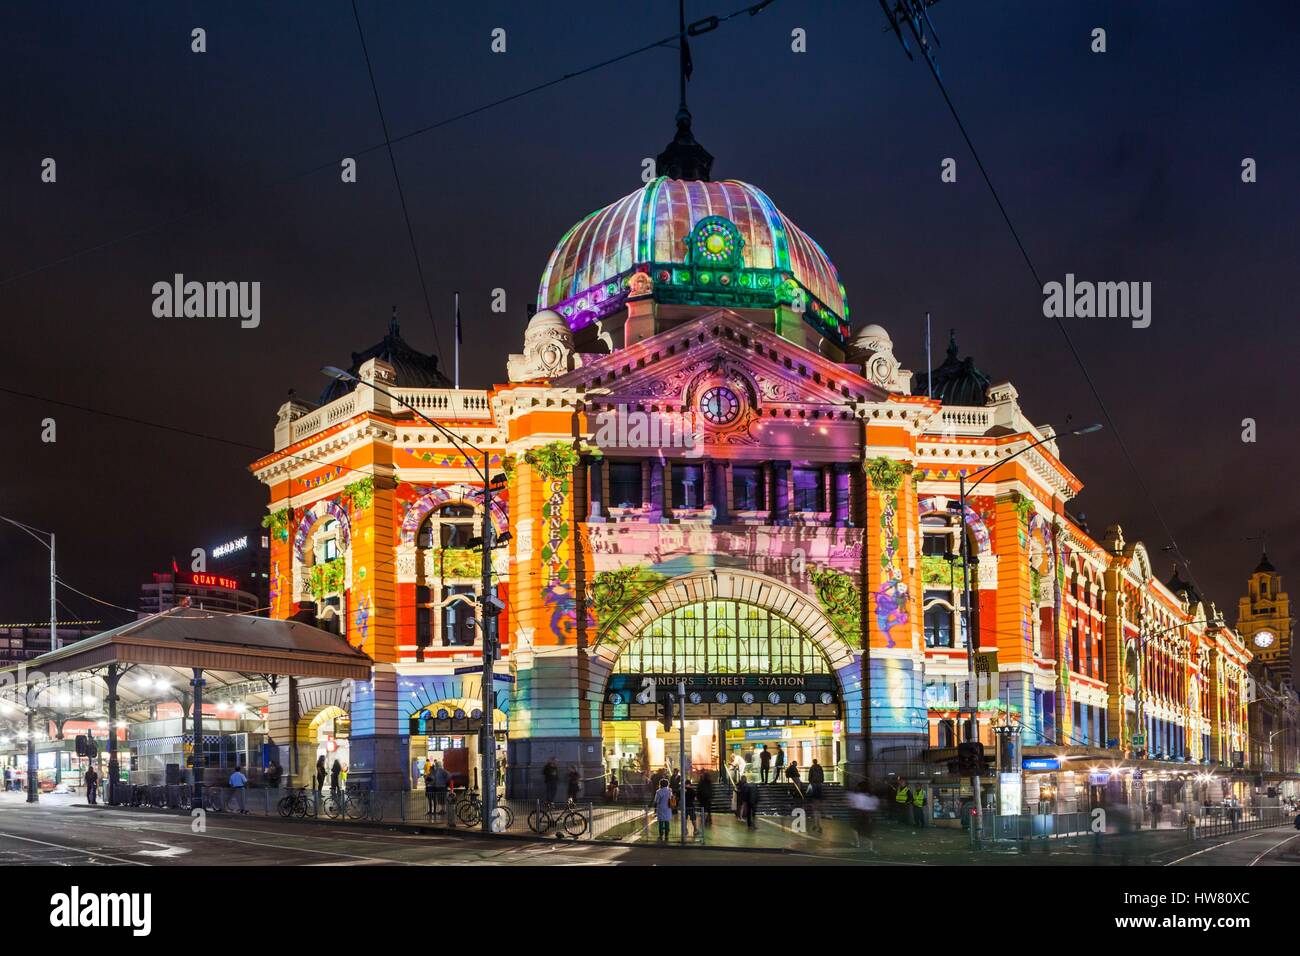 Australia, Victoria, Melbourne, Flinders Street Train Station, lit with projected laser designs, White Nights Festival Stock Photo